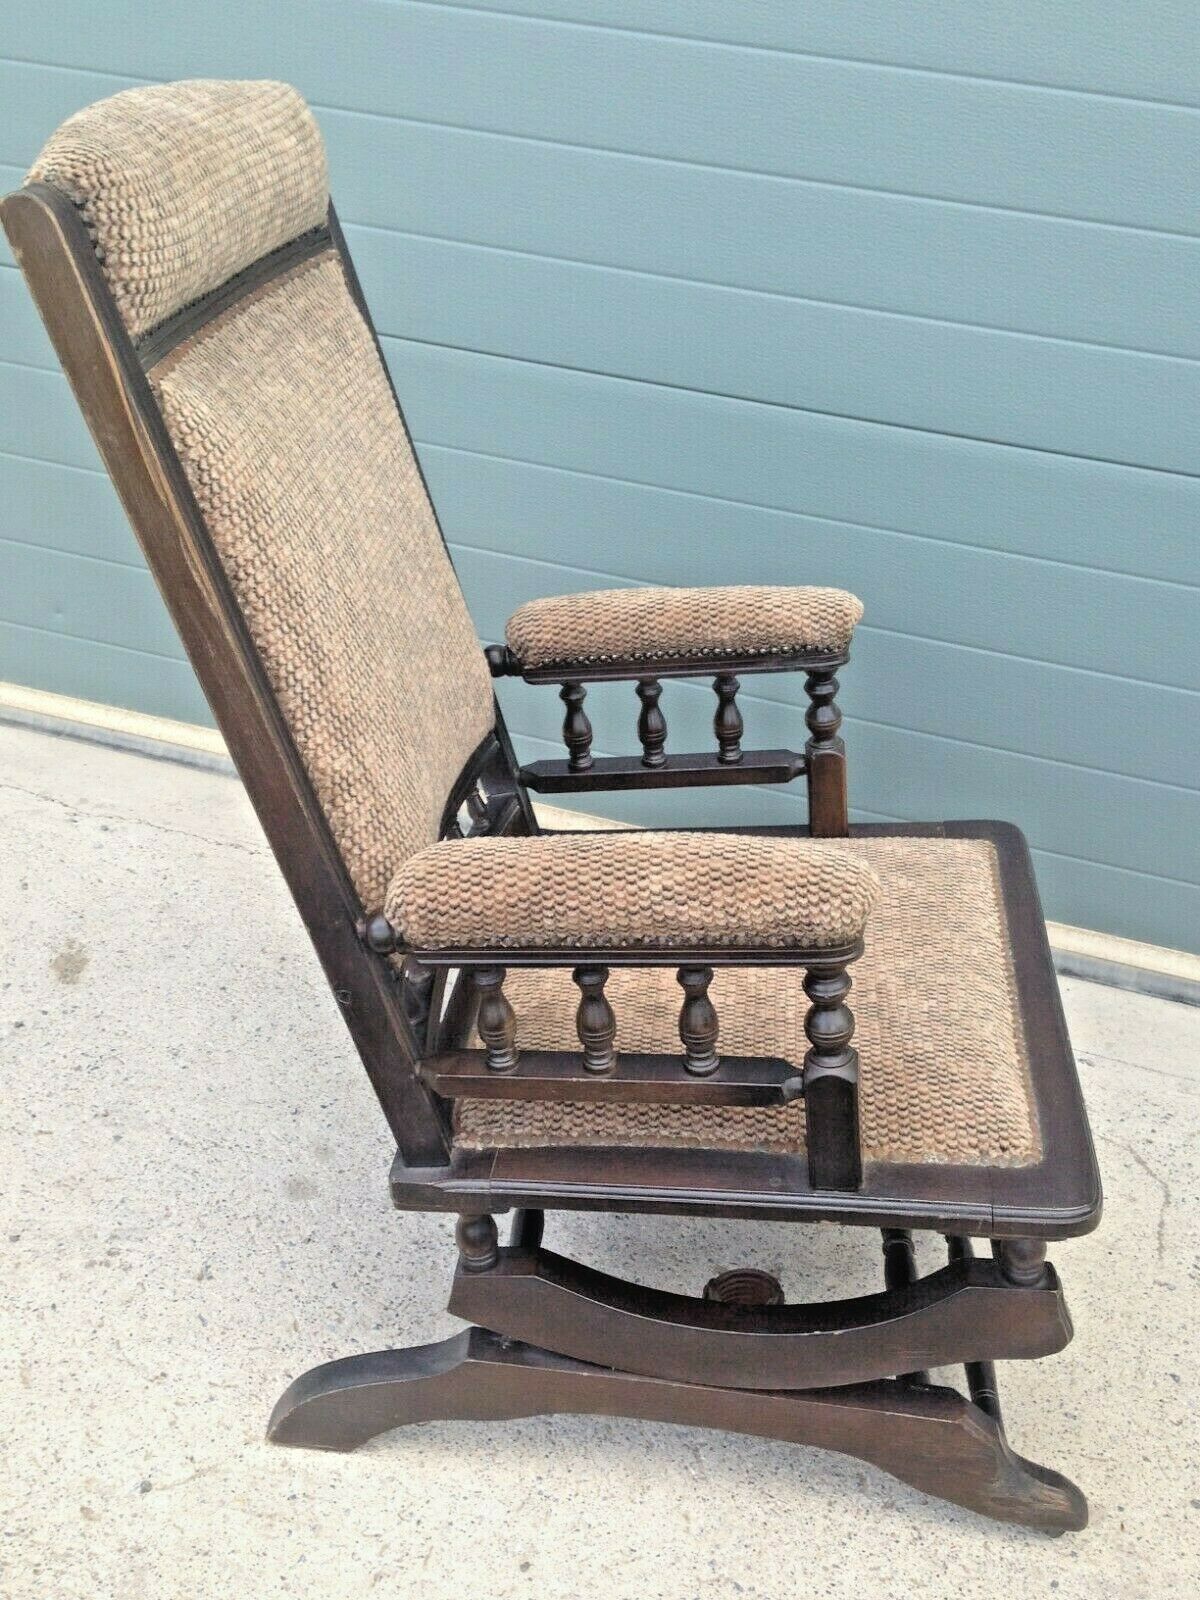 Old American Rocking Chair / Antique Rocking Chair SOLD